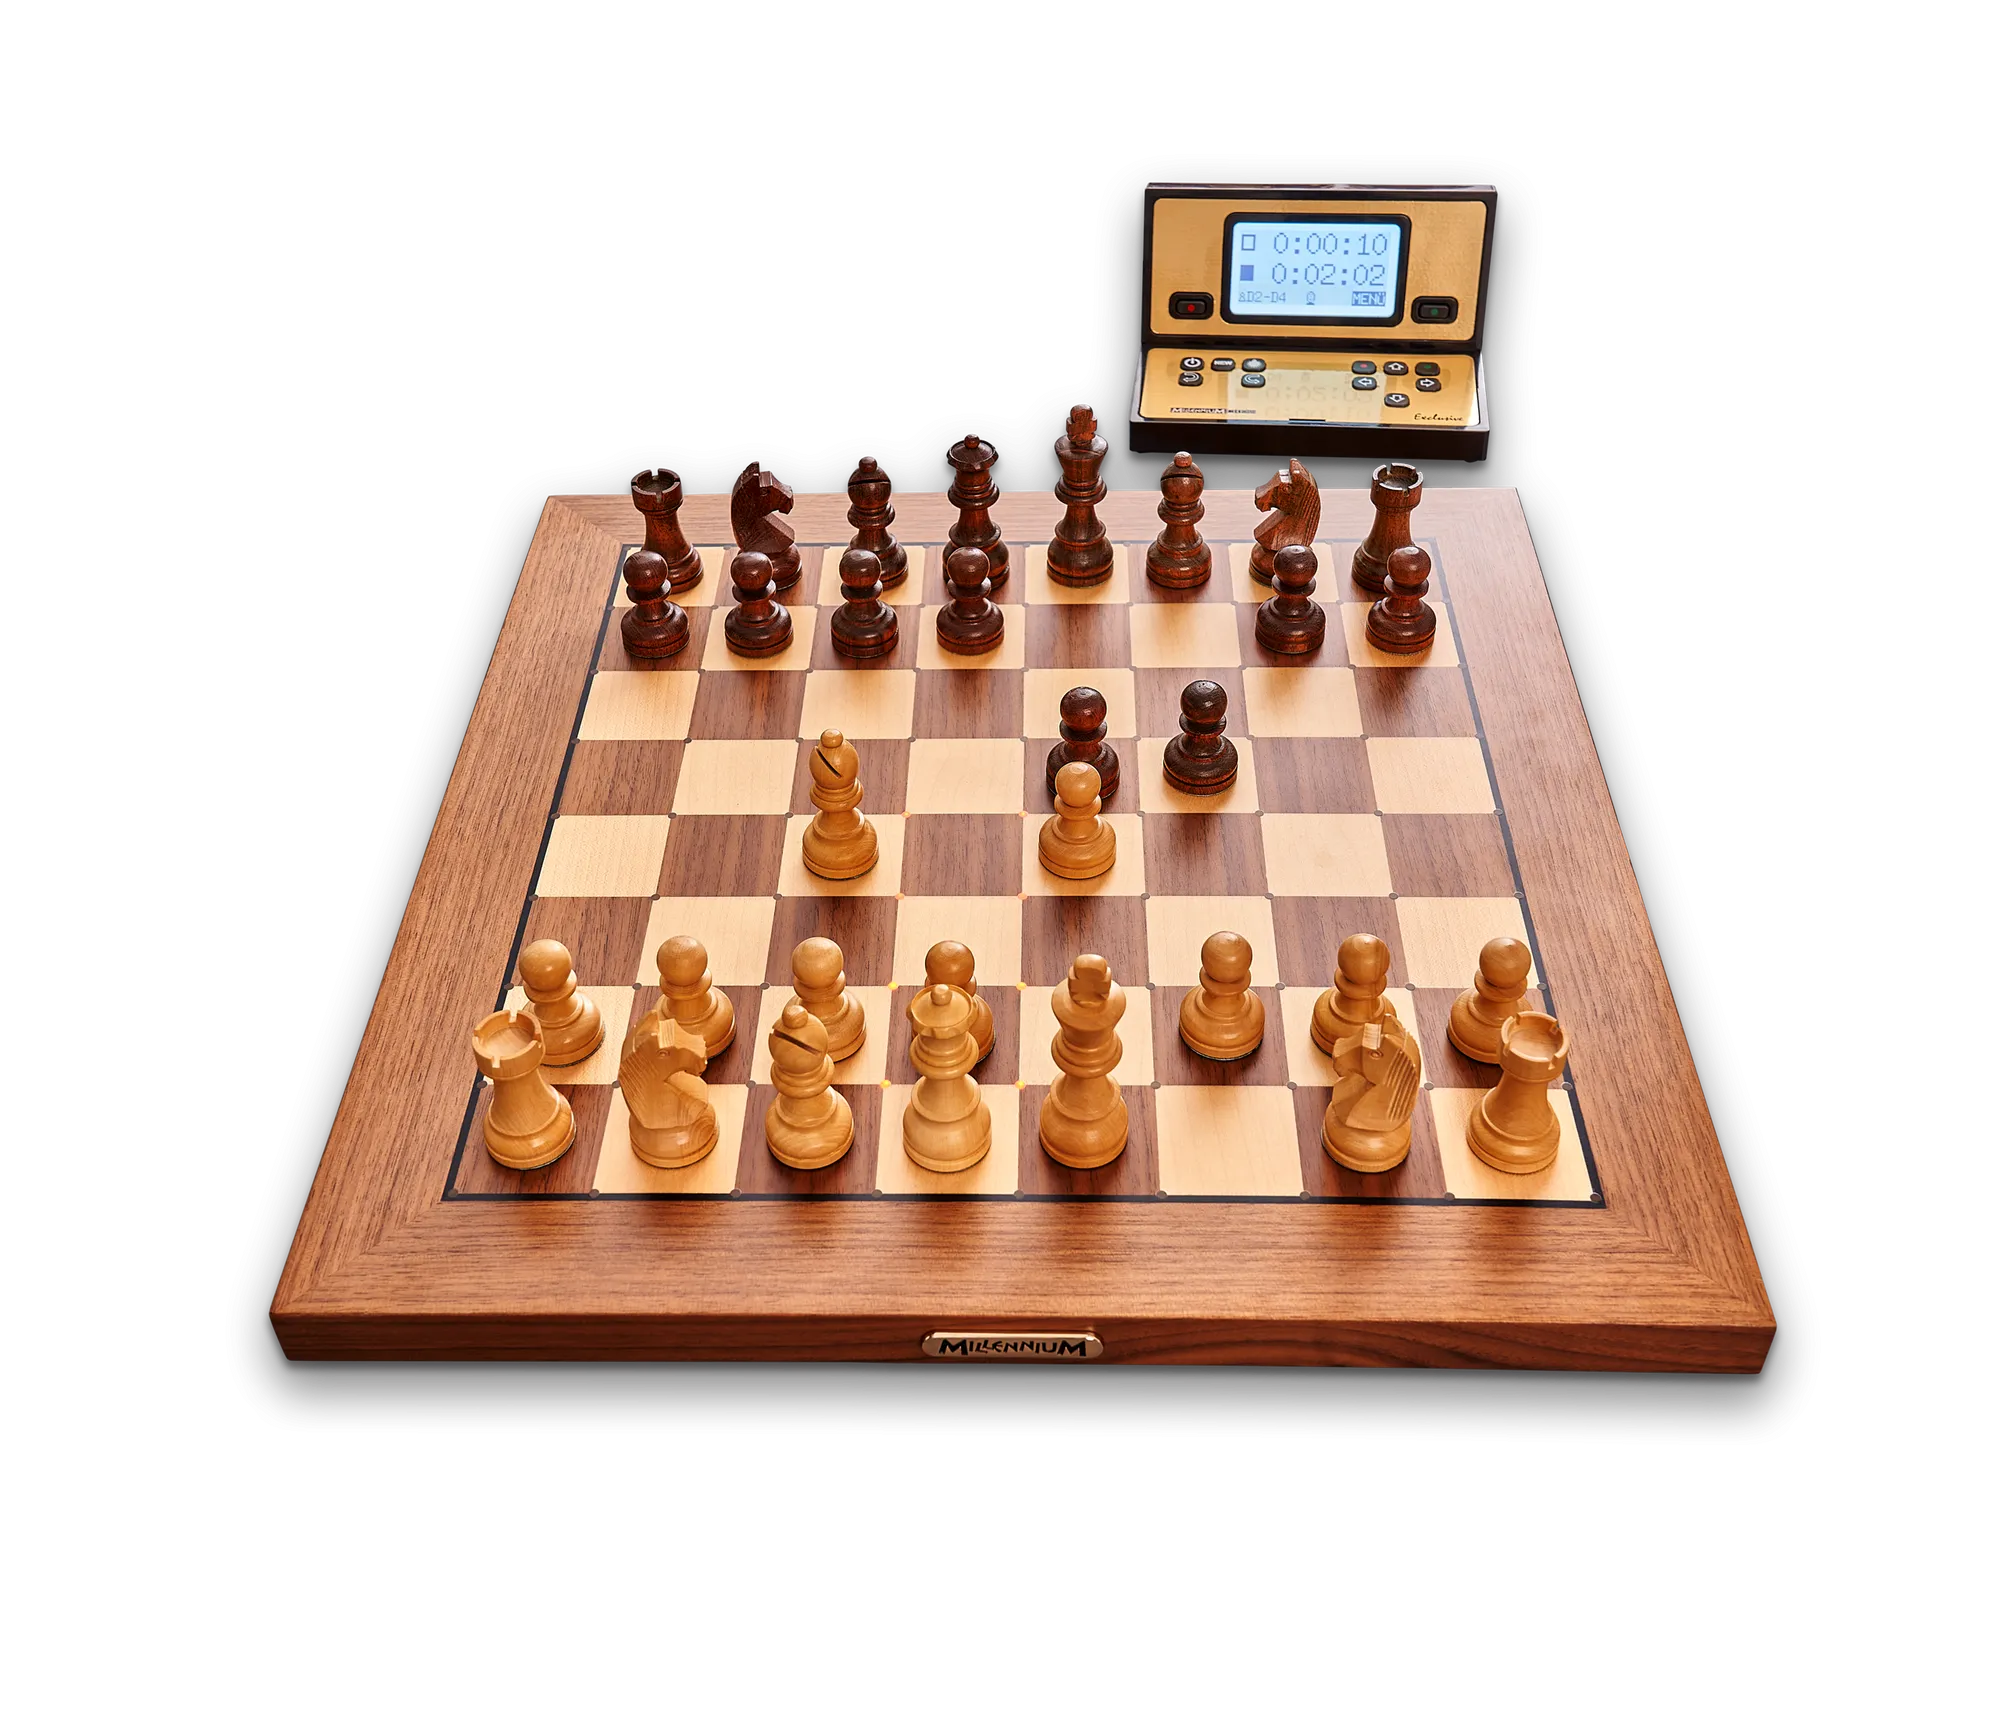 Mephisto Chess Extension: Next Best Move Analysis for Chess Websites